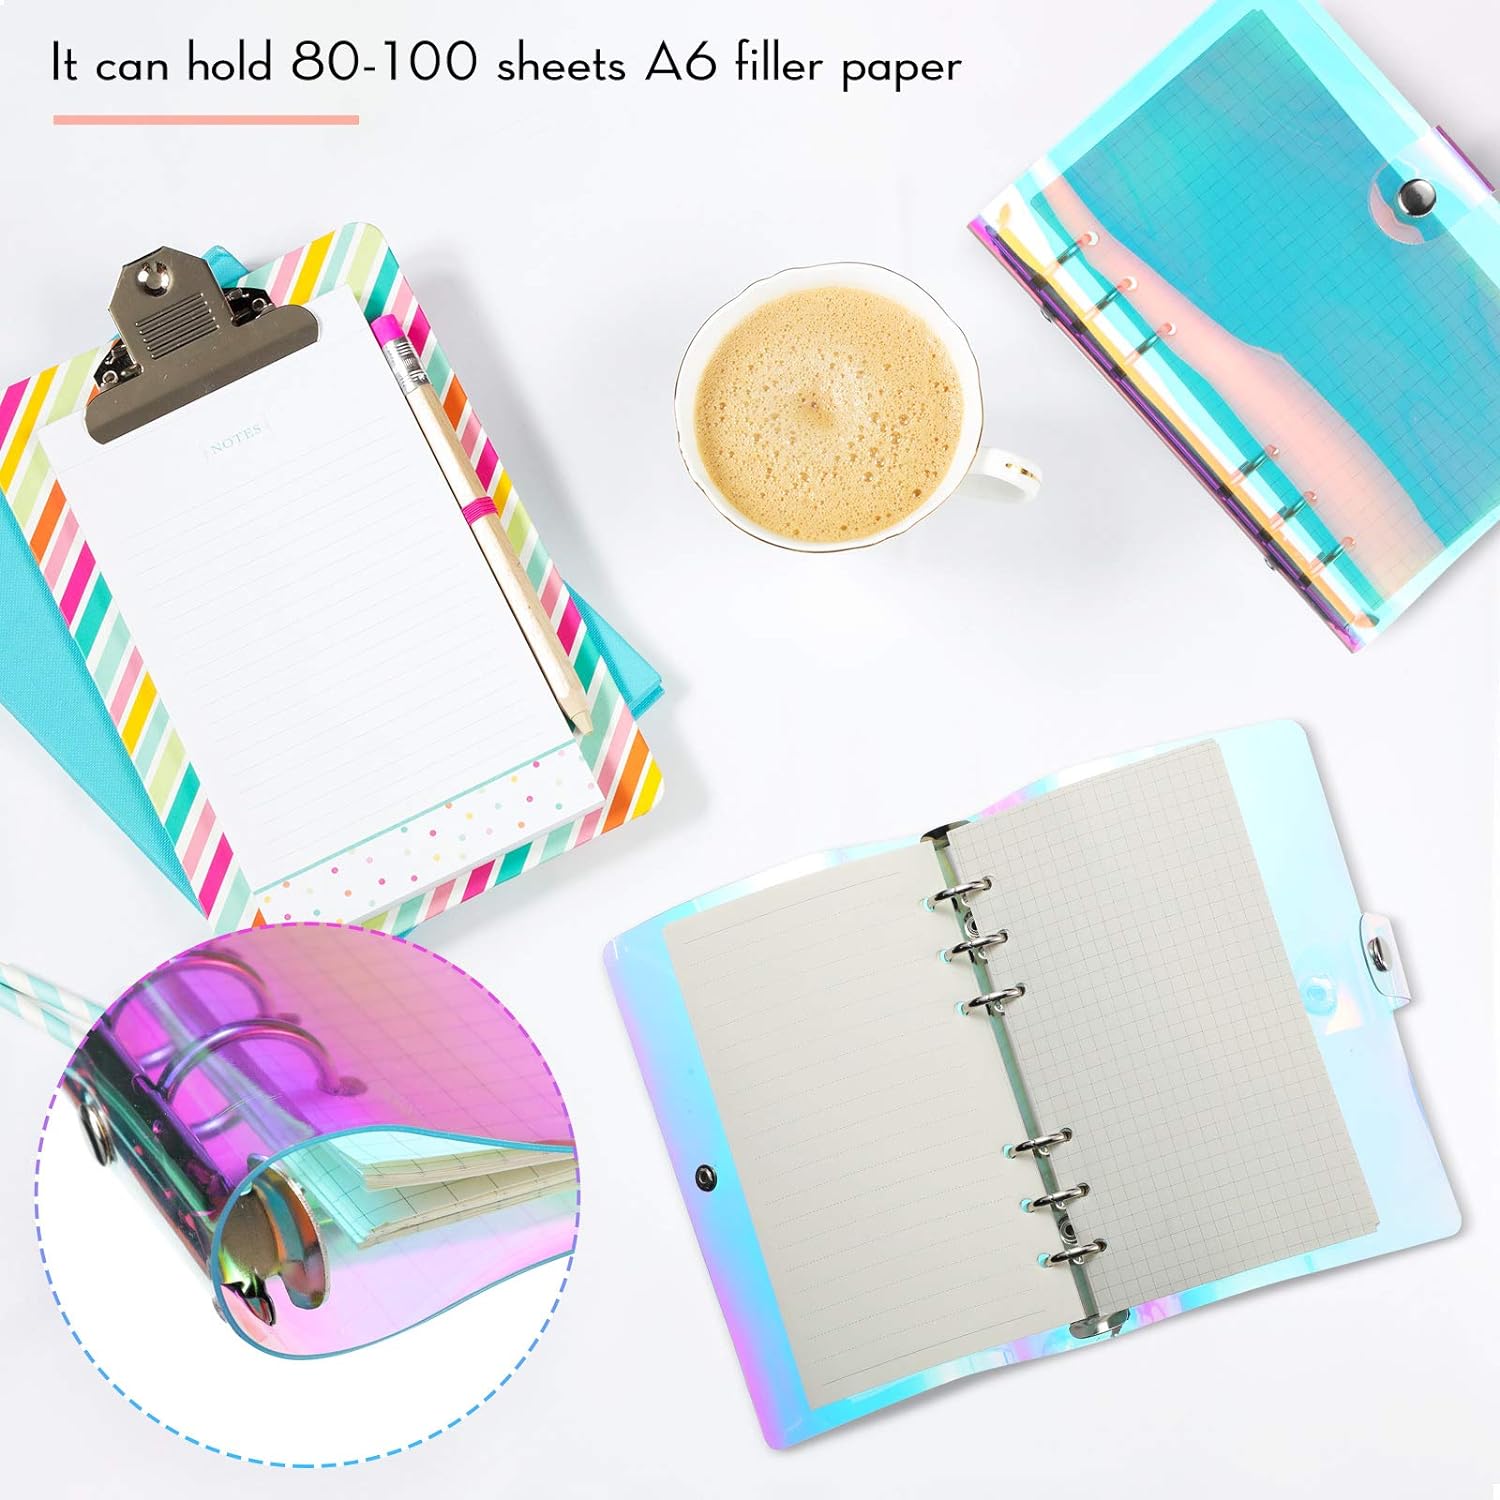 6 Pieces Rainbow Clear Notebook Binders 6-Ring Planner Binder Soft PVC Binder Transparent A6 Binder Cover Loose Leaf Personal Planner with Snap Button Closure